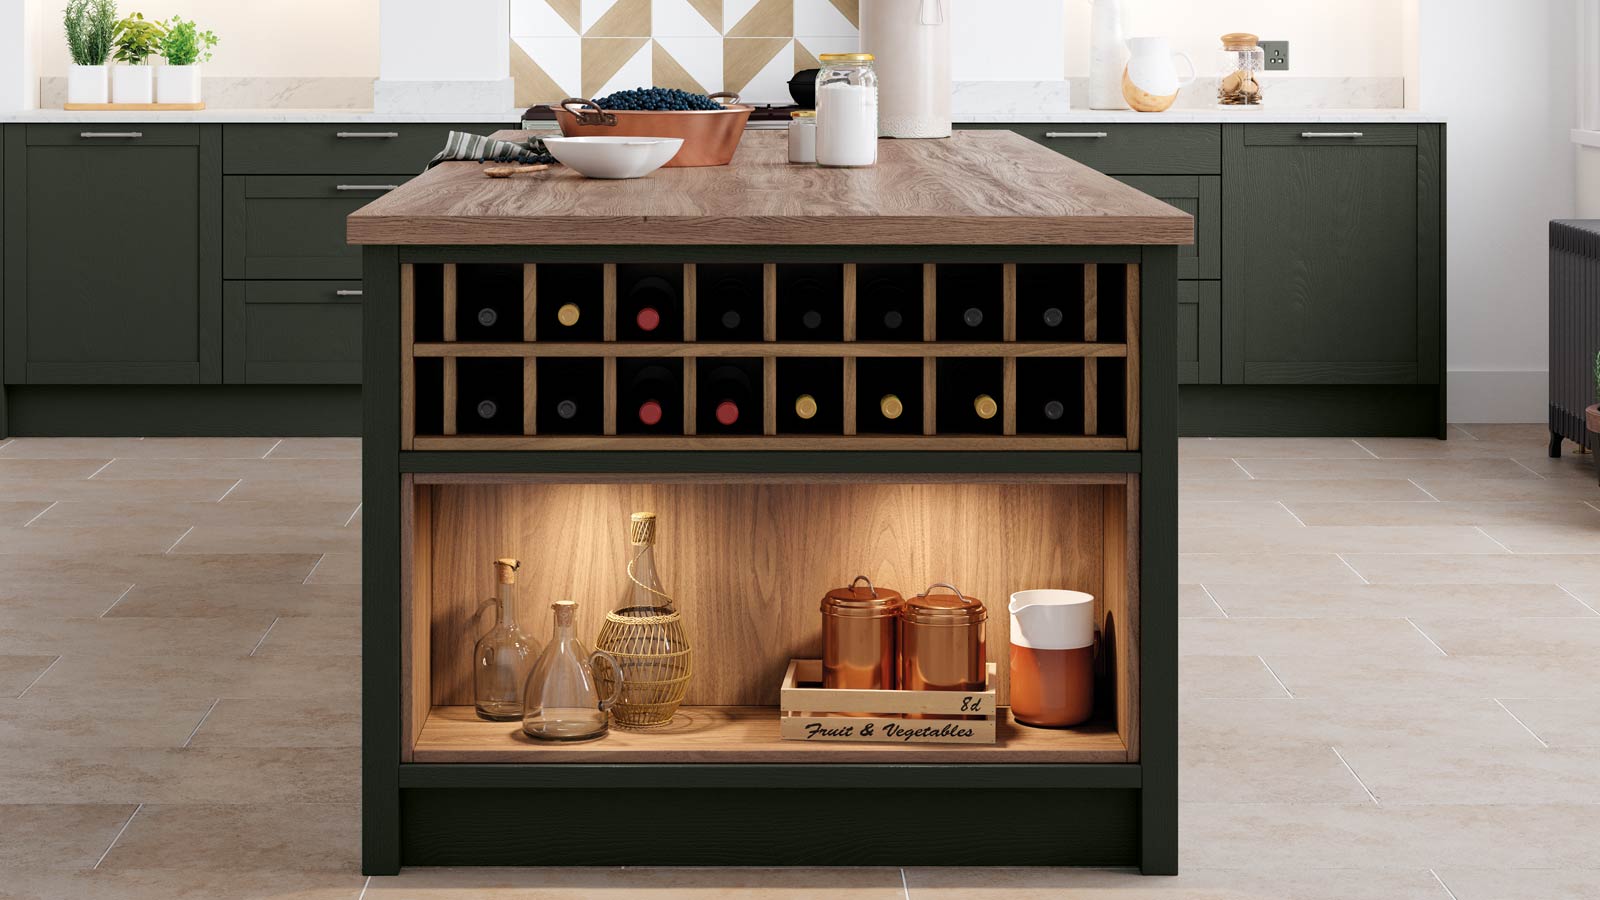 Wall wine rack in a sage green Shaker-style kitchen island